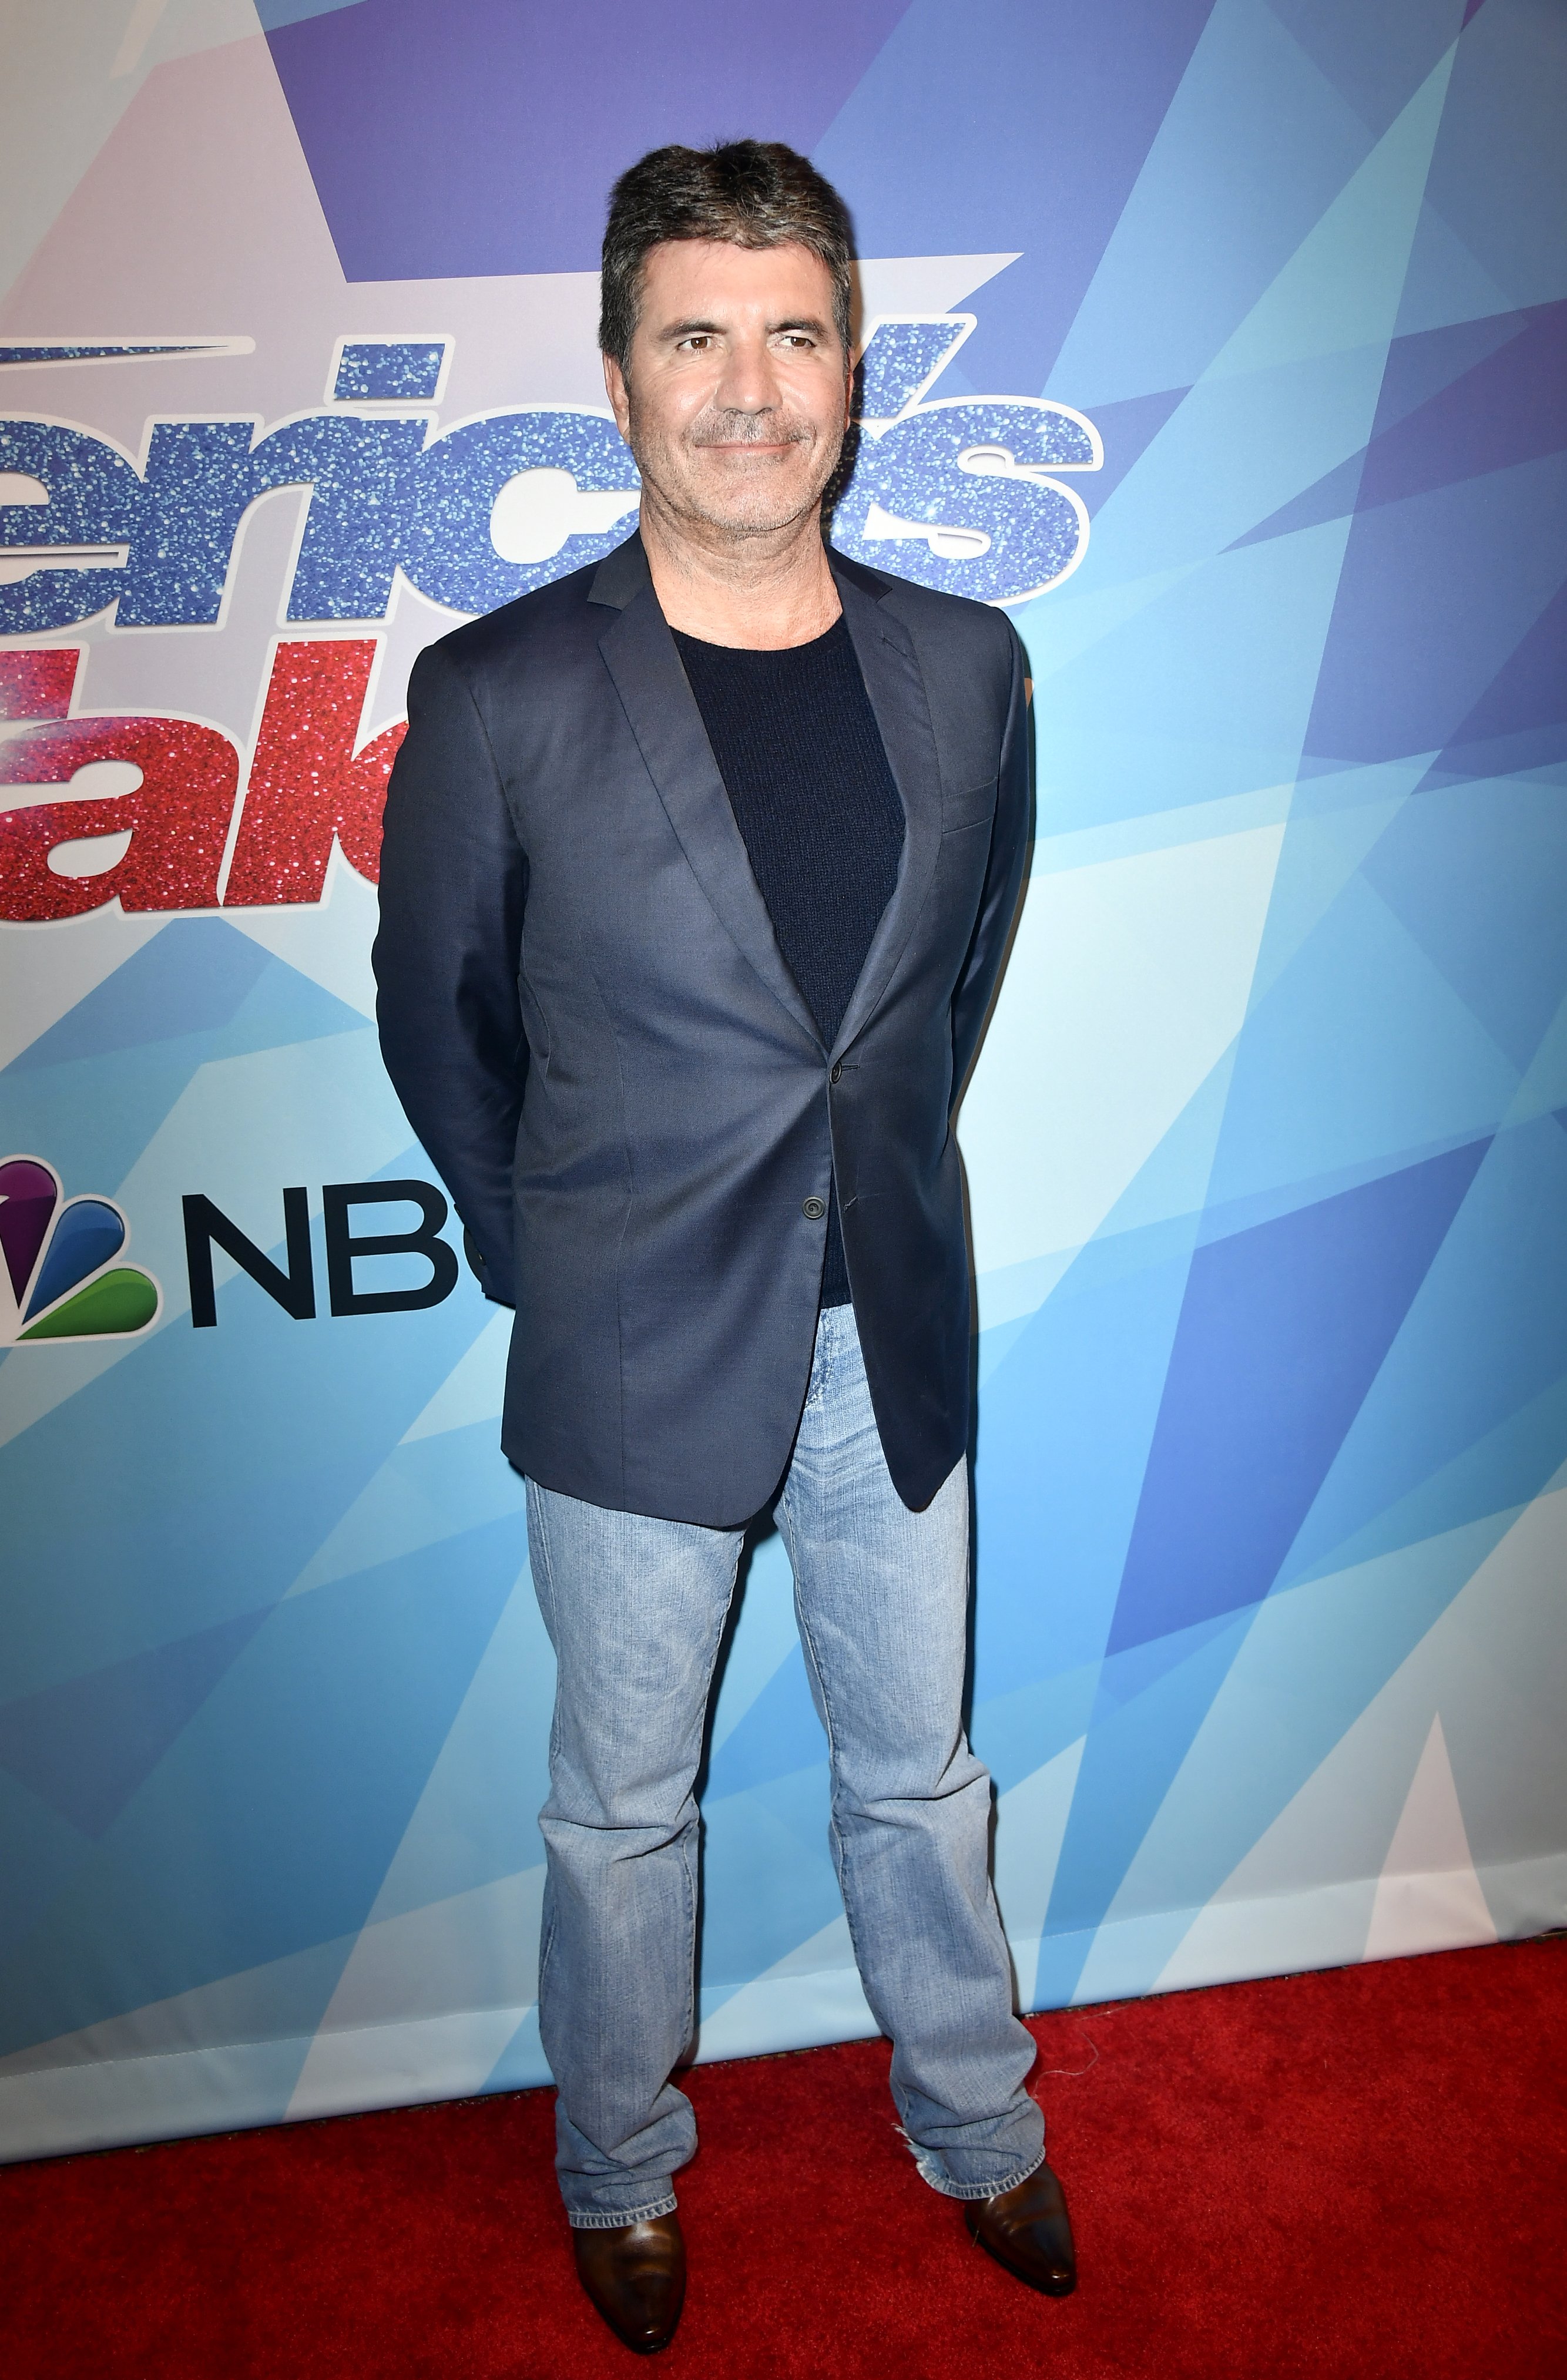 Simon Cowell attends the Premiere Of NBC's 'America's Got Talent' Season 12 at Dolby Theatre on August 15, 2017 in Los Angeles